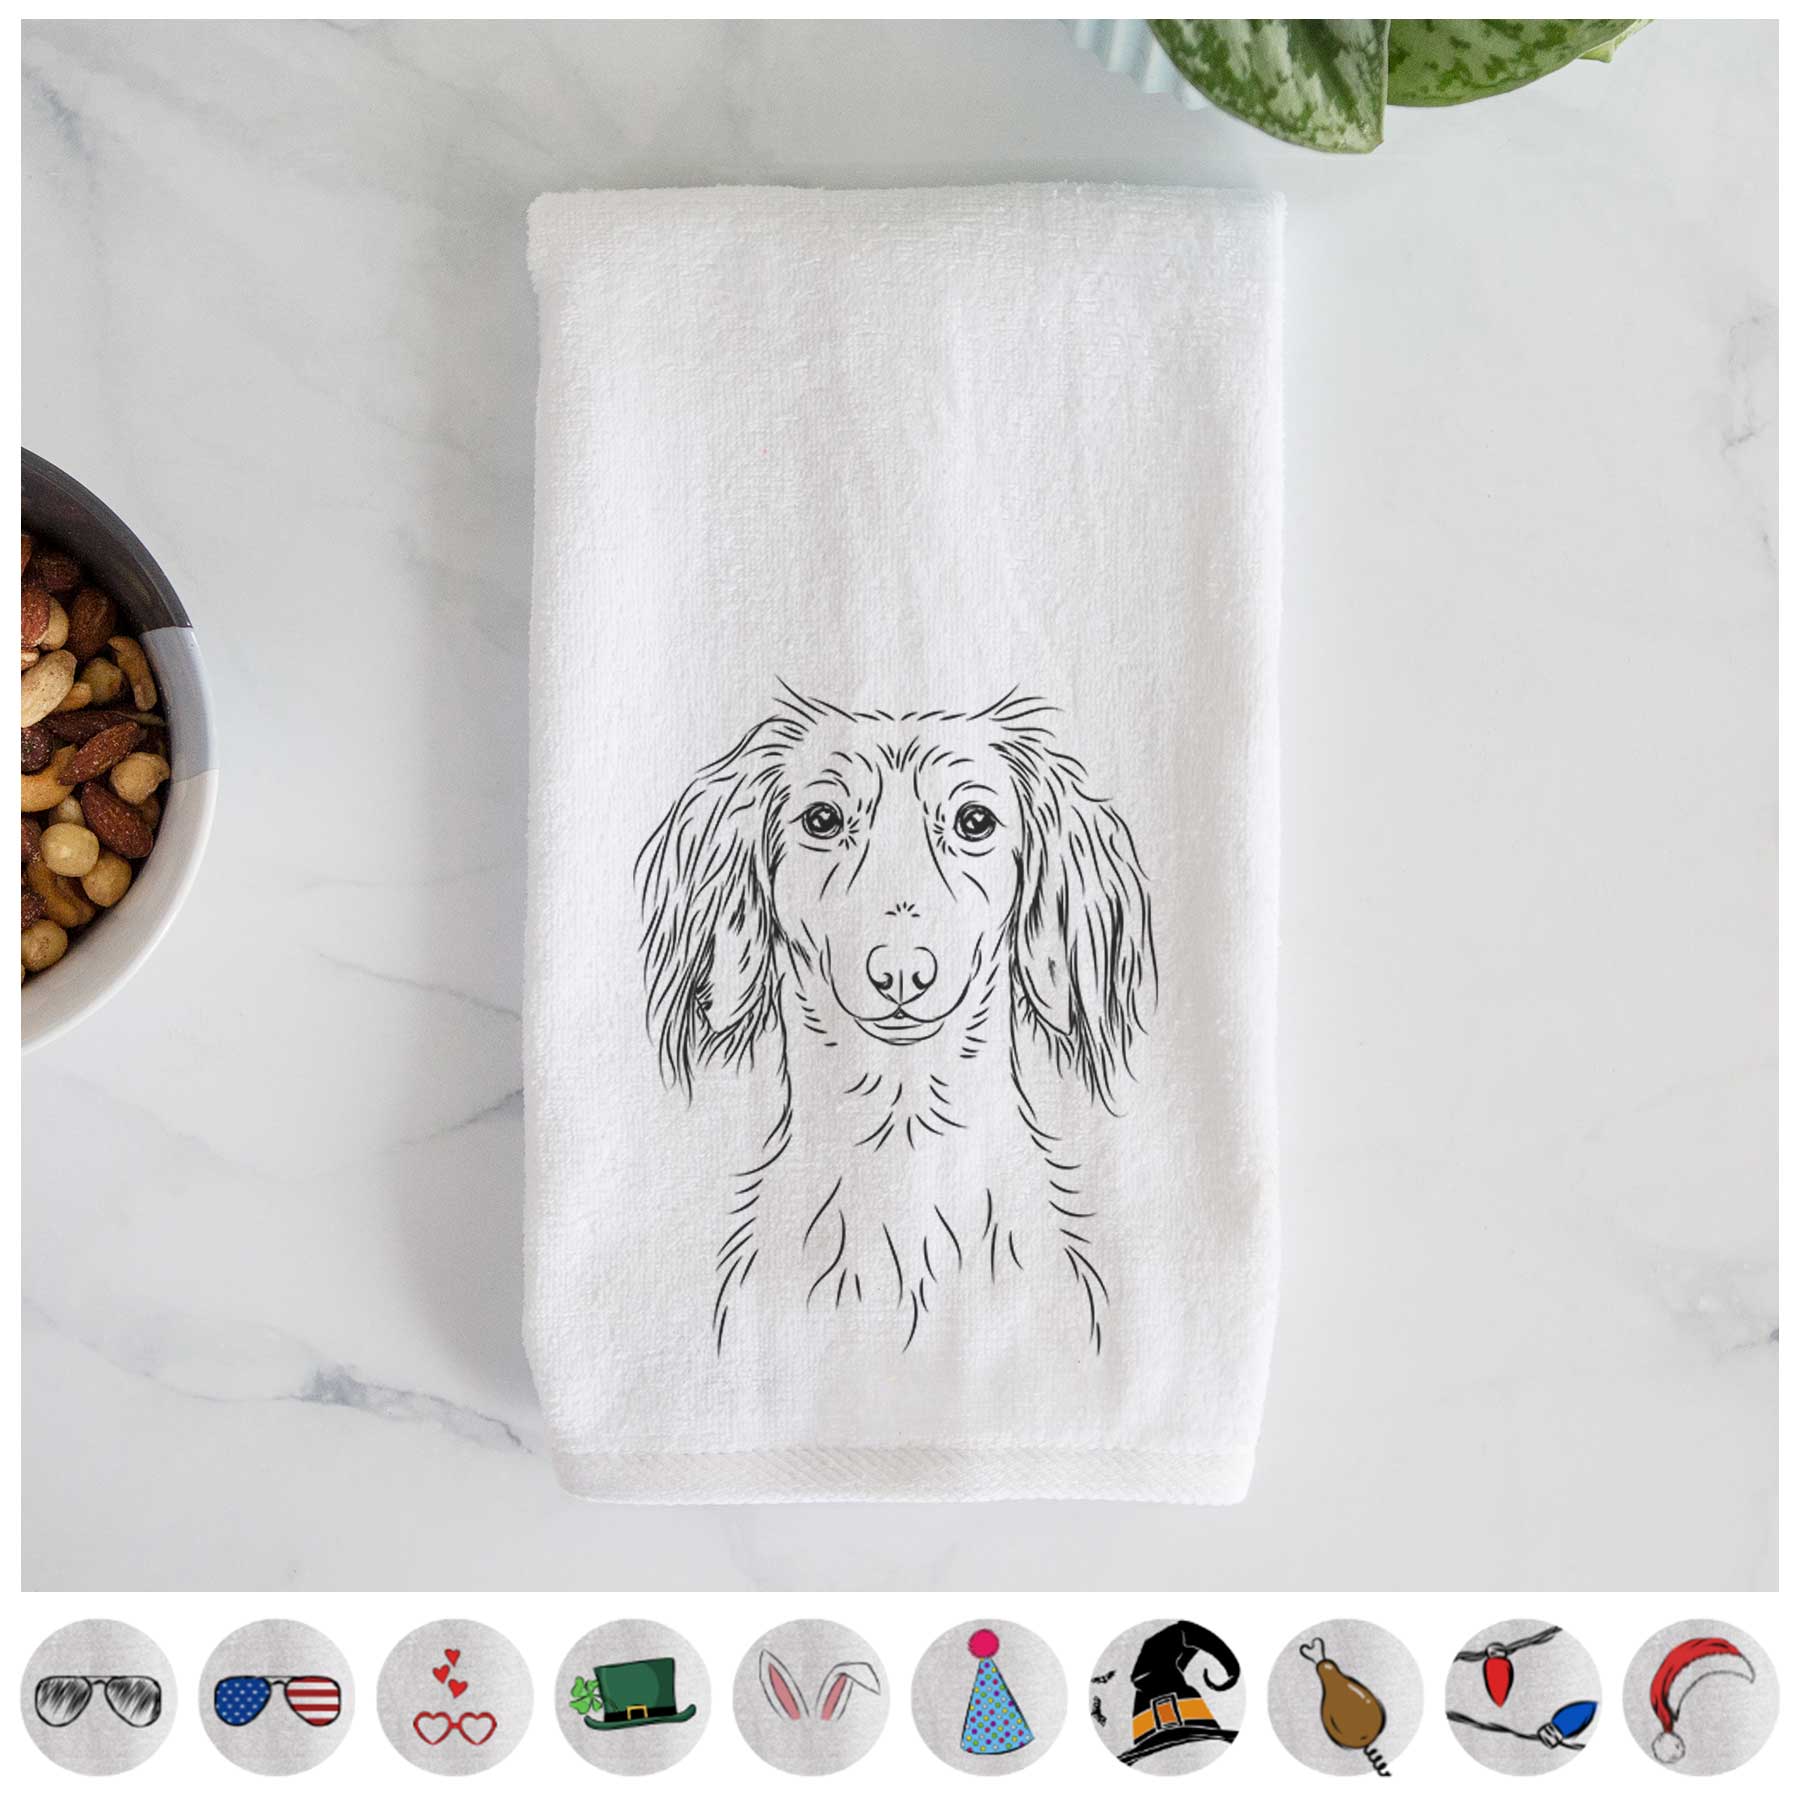 Roux the Long Haired Dachshund Hand Towel